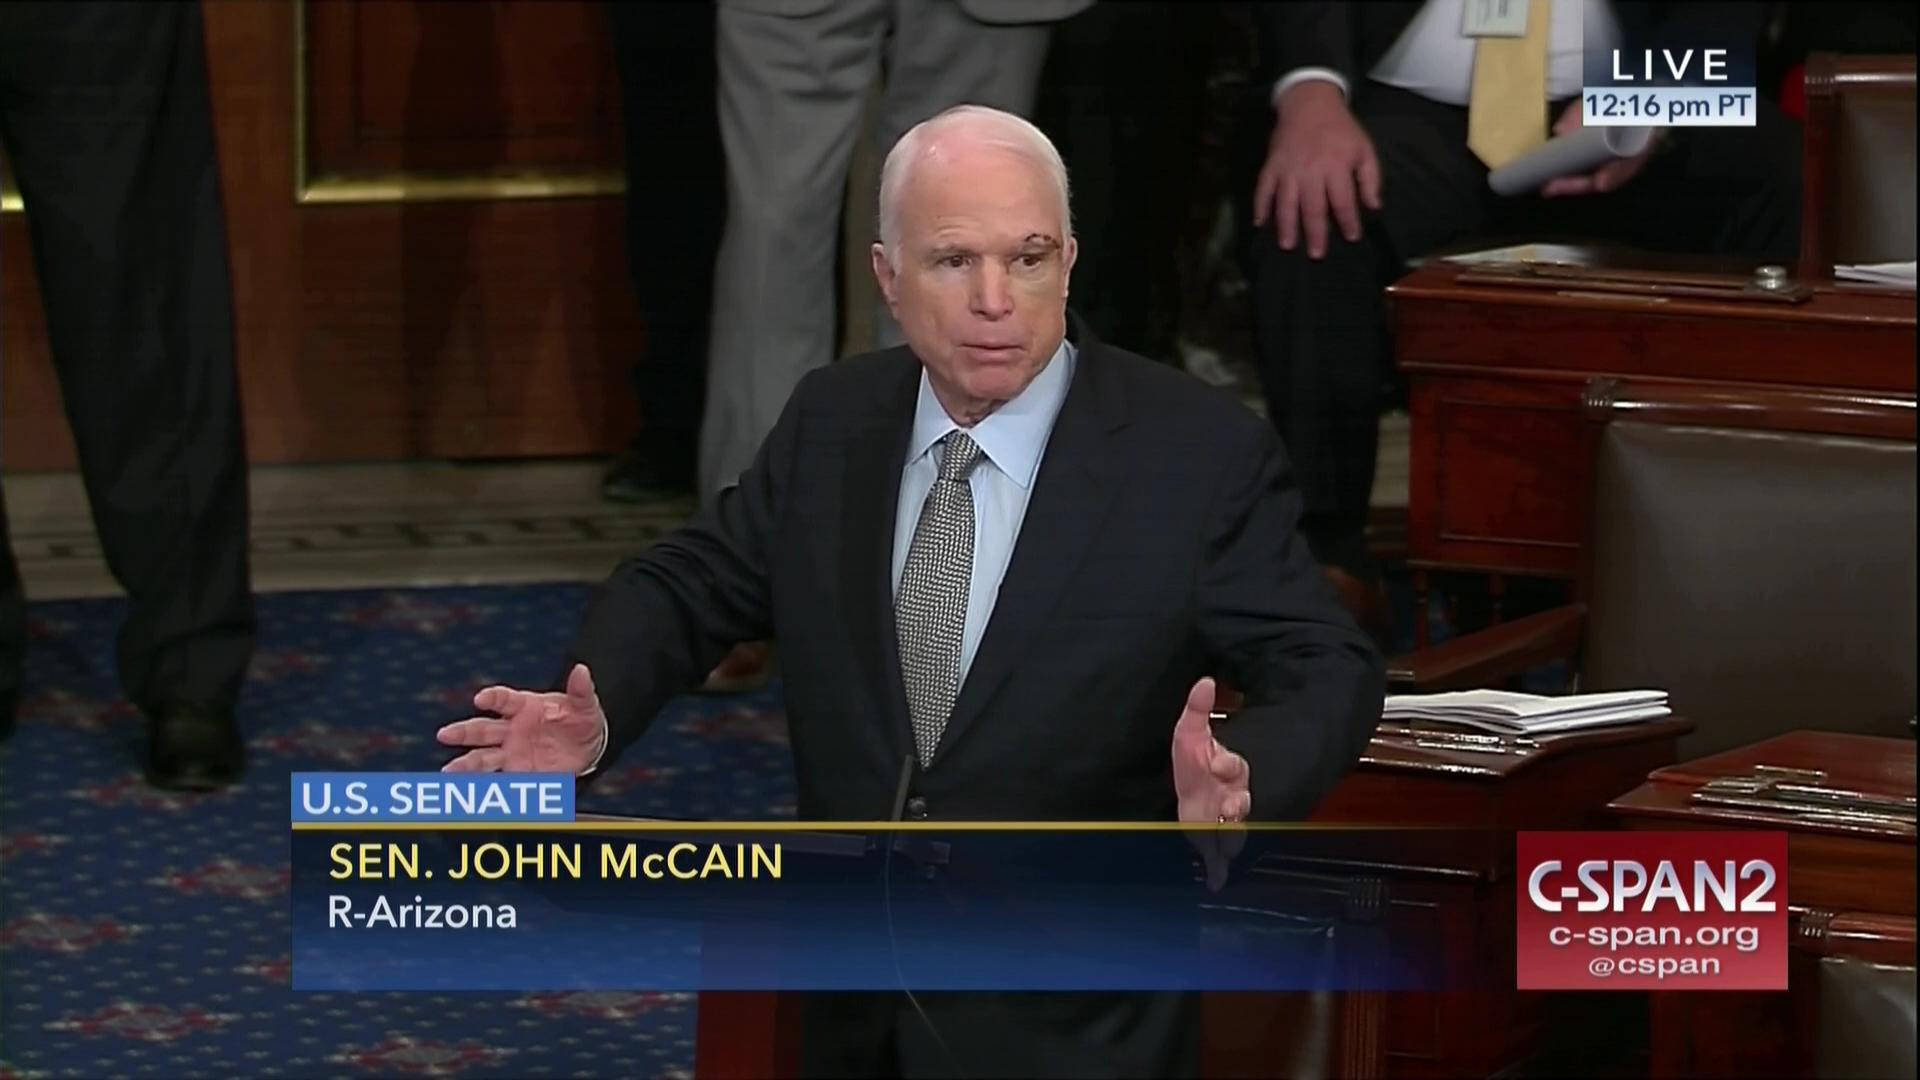 In this image from video provided by C-SPAN2, Sen. John McCain, R-Arizona, speaks the floor of the Senate on Capitol Hill in Washington, Tuesday, July 25, 2017. McCain returned to Congress for the first time since being diagnosed with brain cancer. (C-SPAN2 via AP)